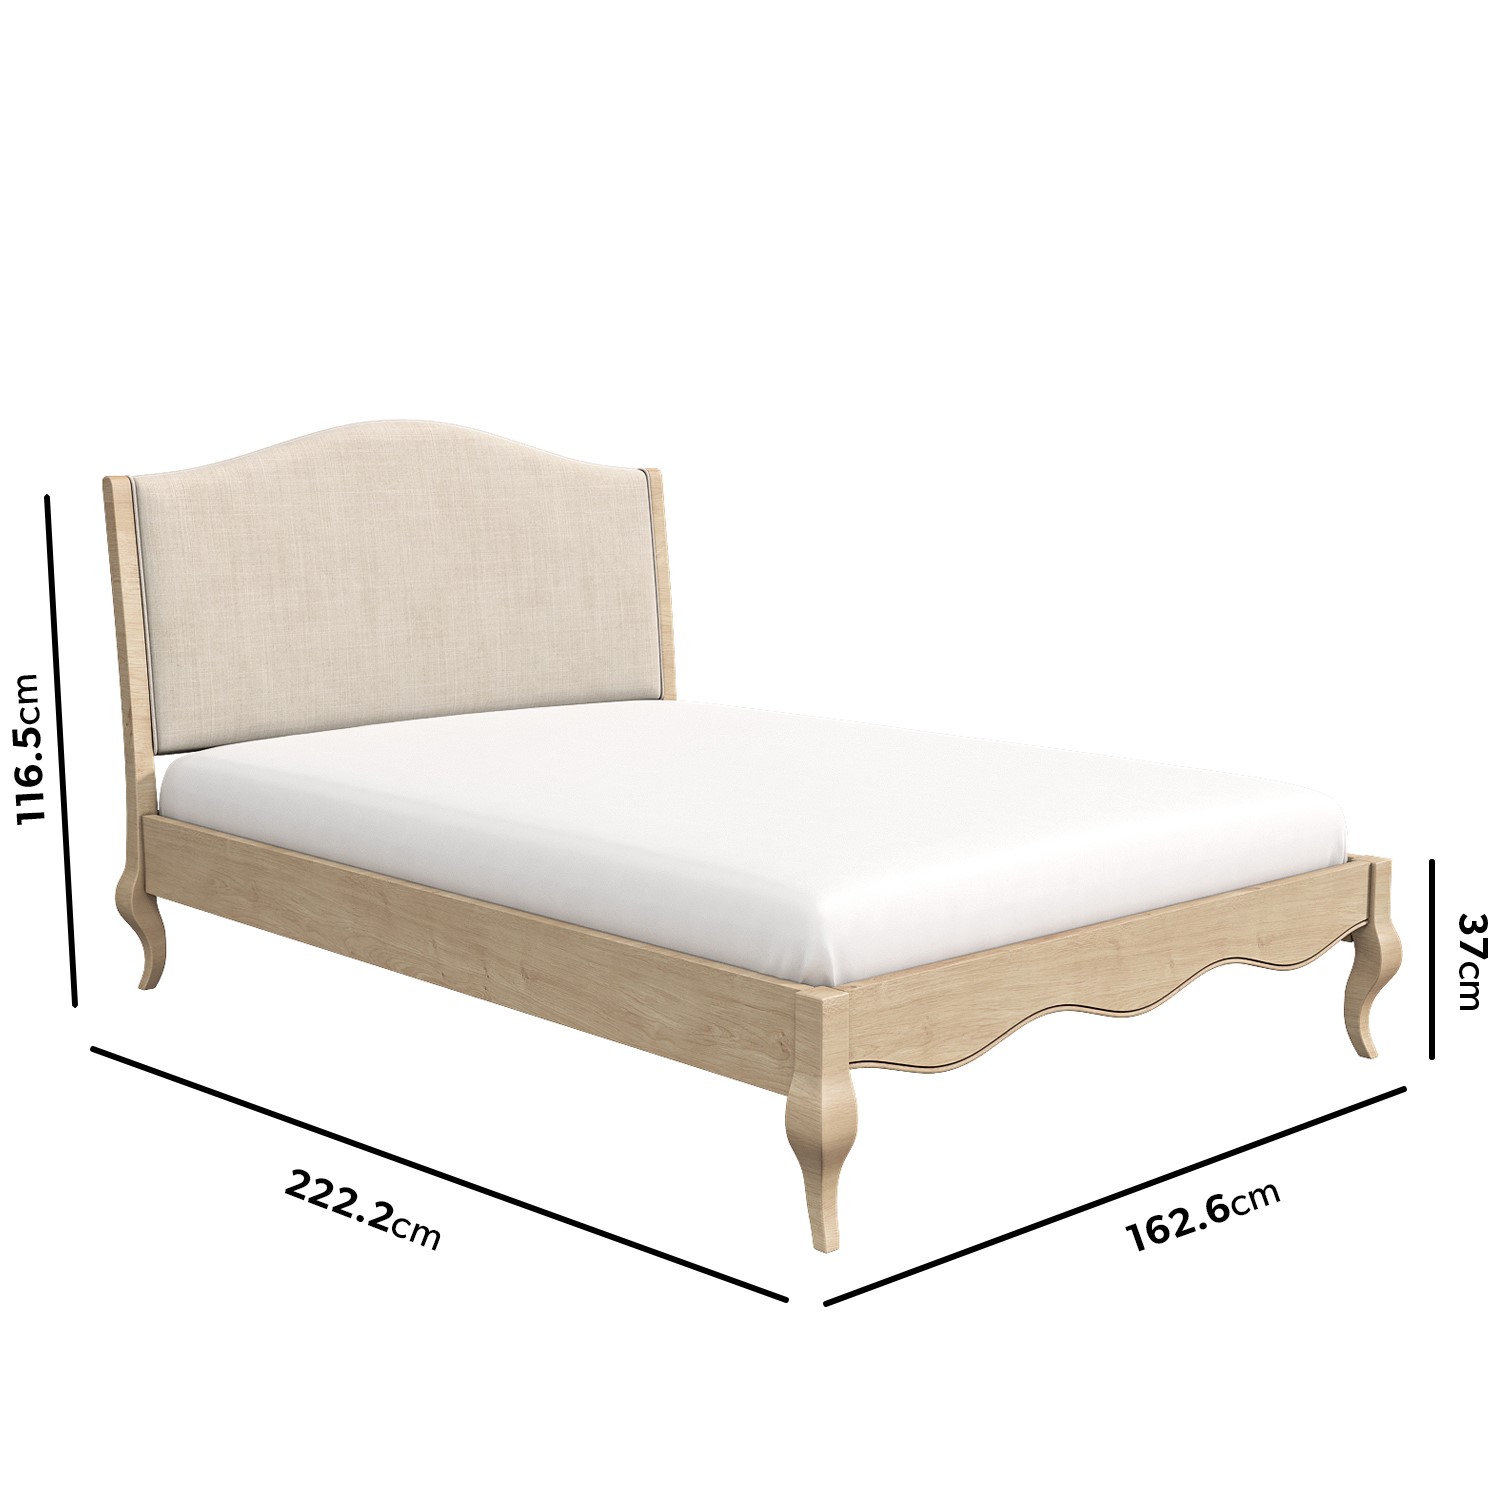 Read more about French beige linen king size bed frame genevieve